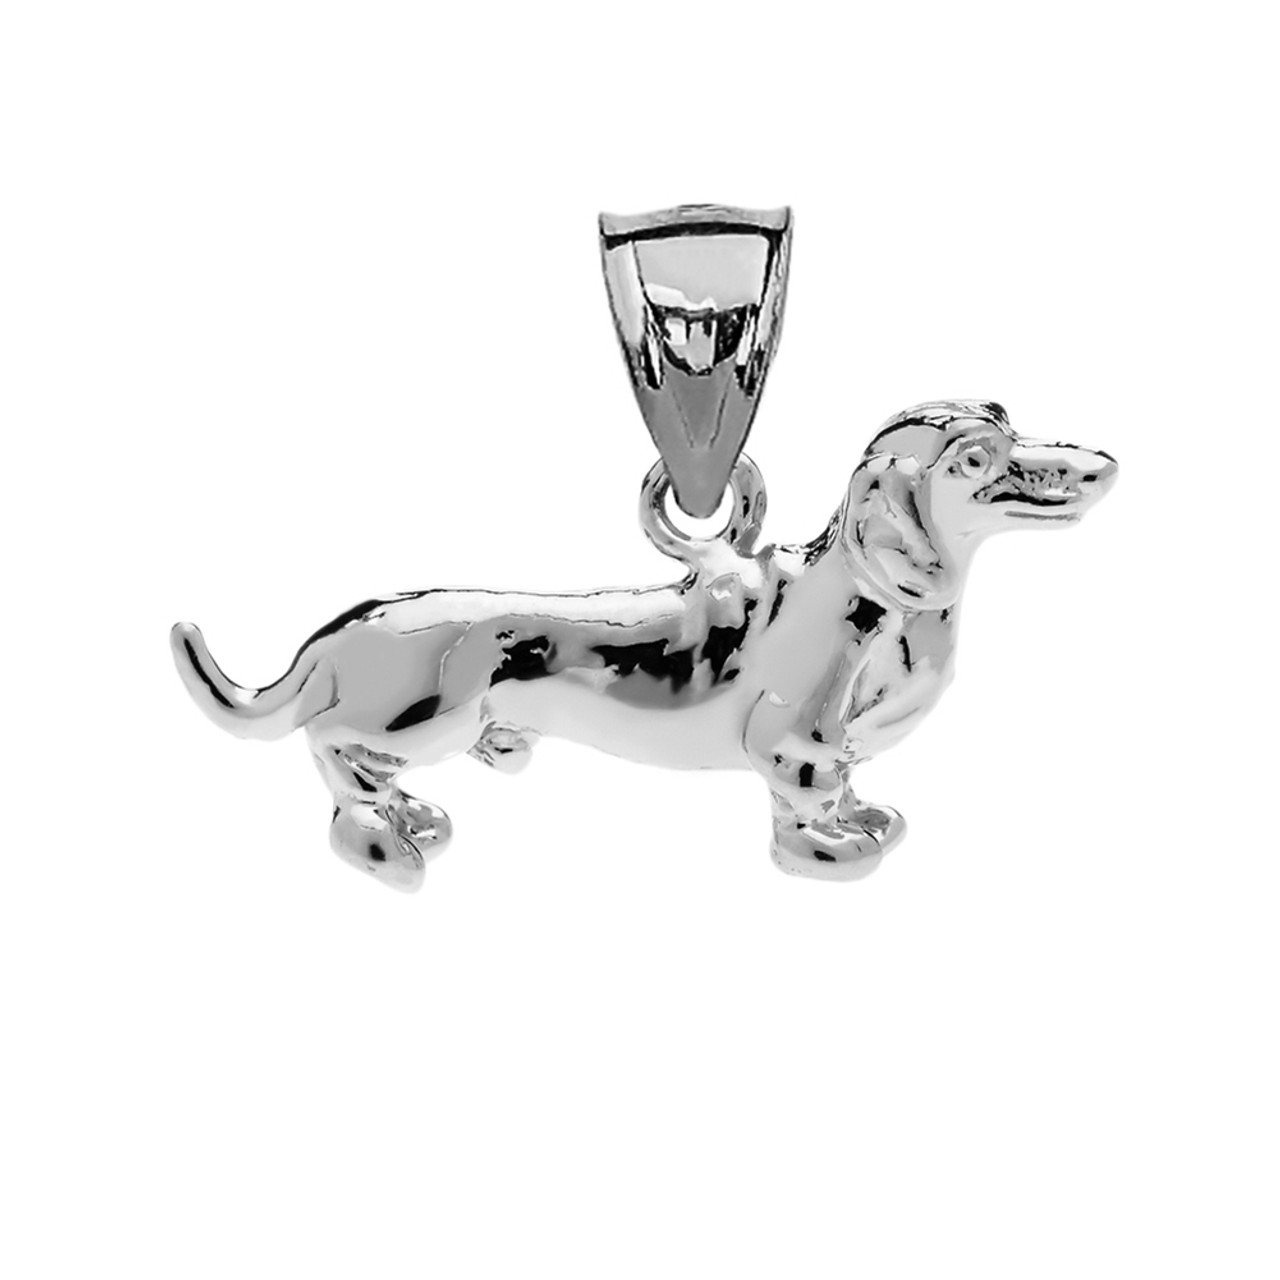 Dachshund Pendant Necklace in Sterling Silver